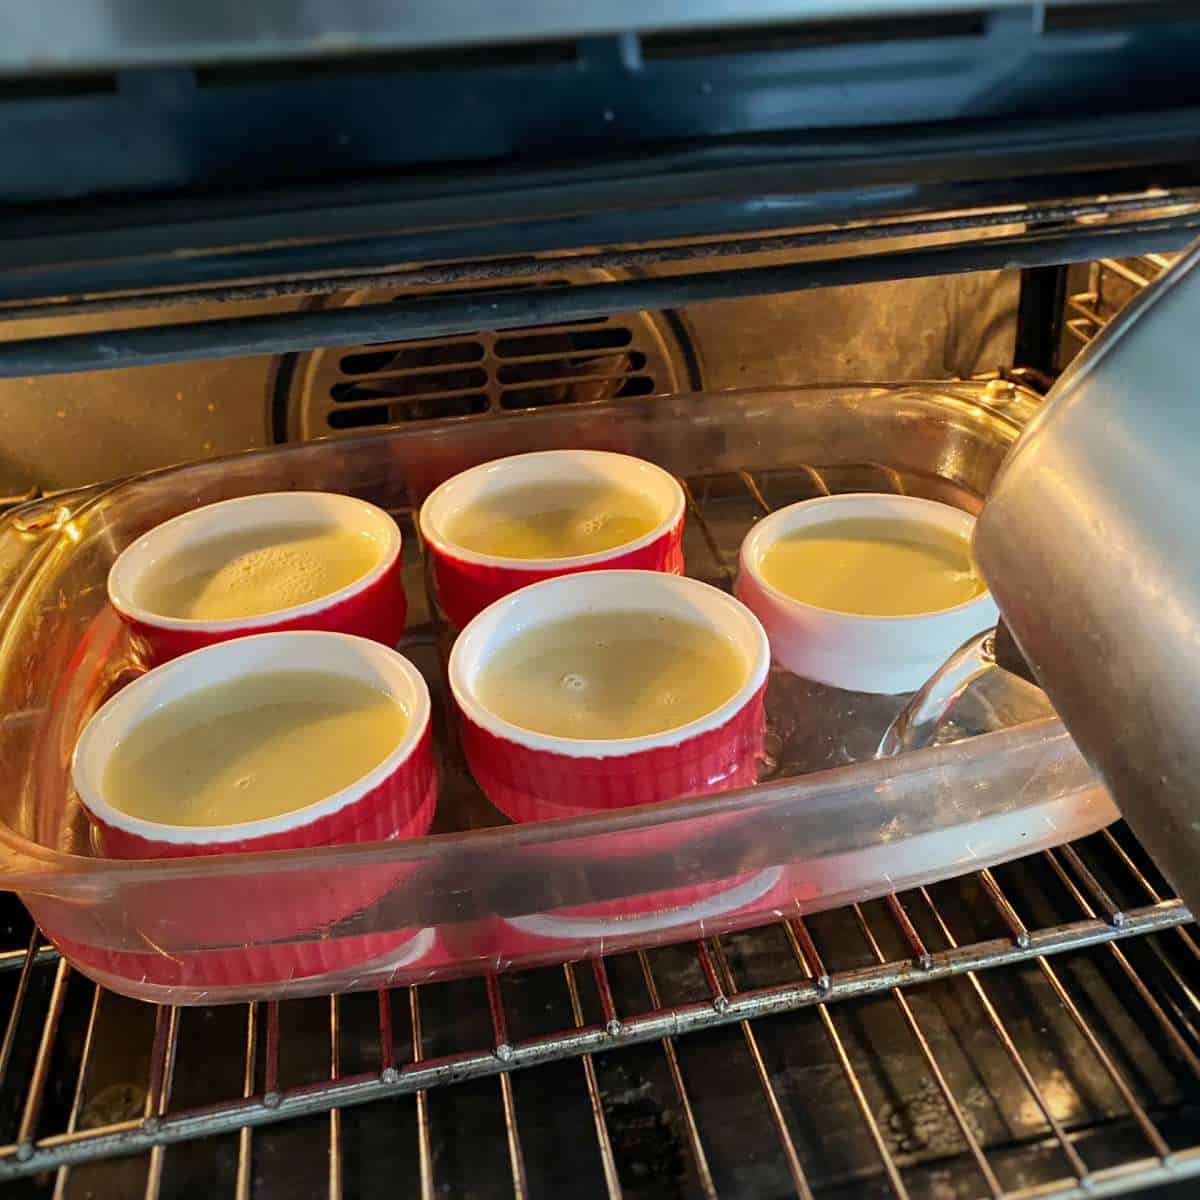 Five ramikins of creme brulee in the oven